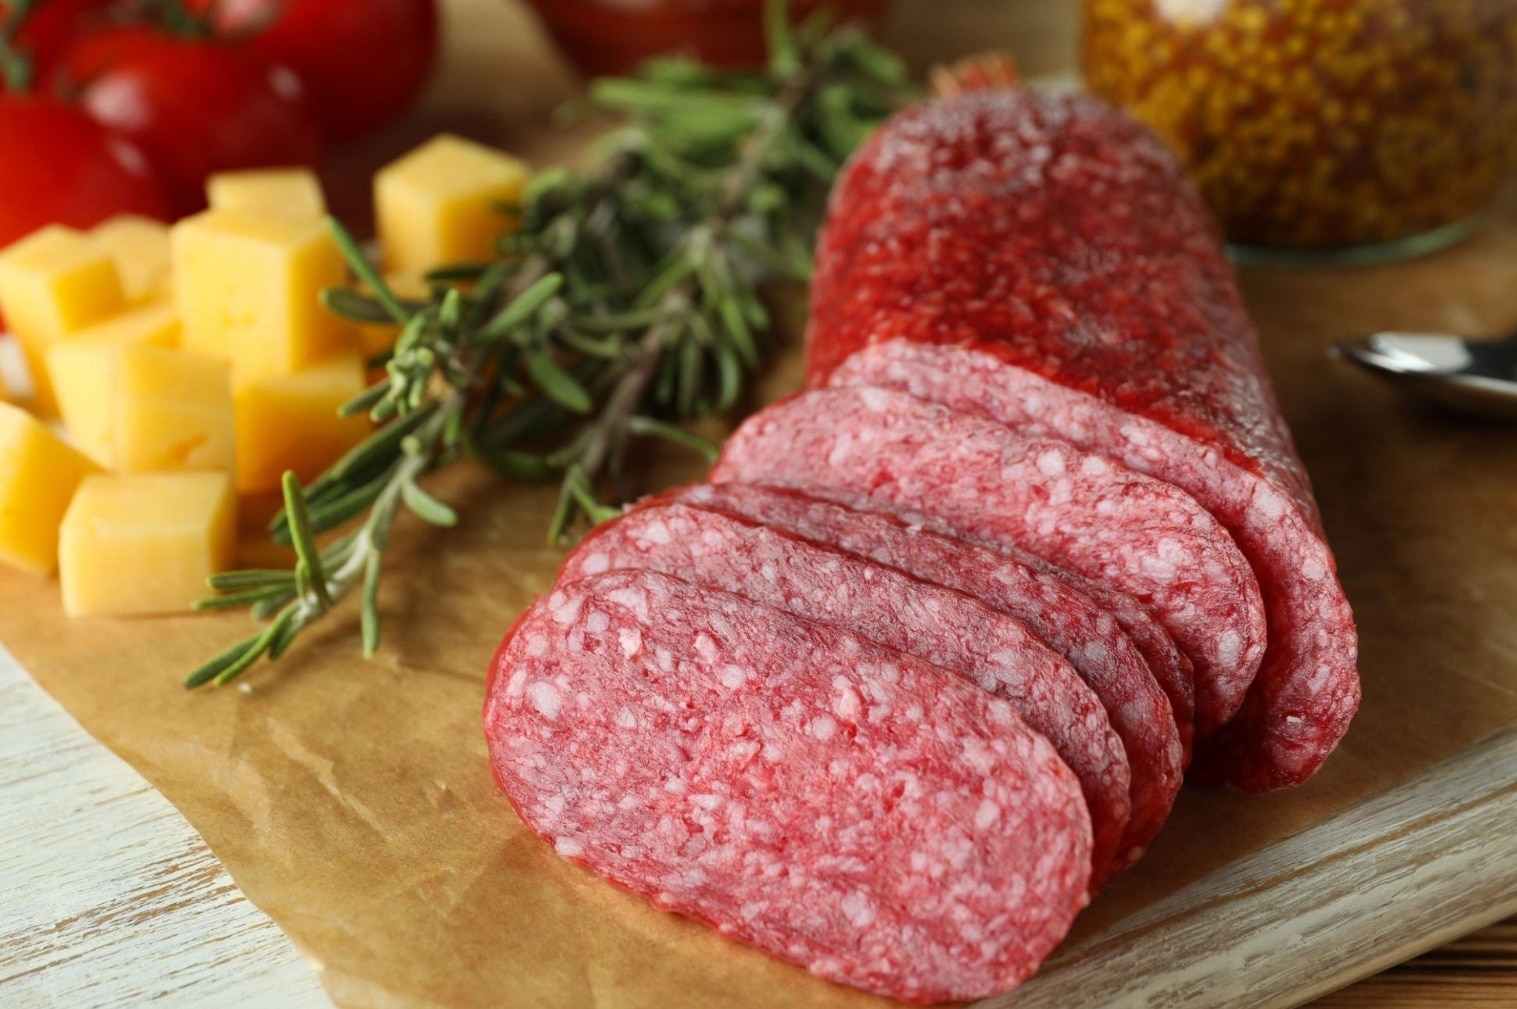 Is salami good with cheese?